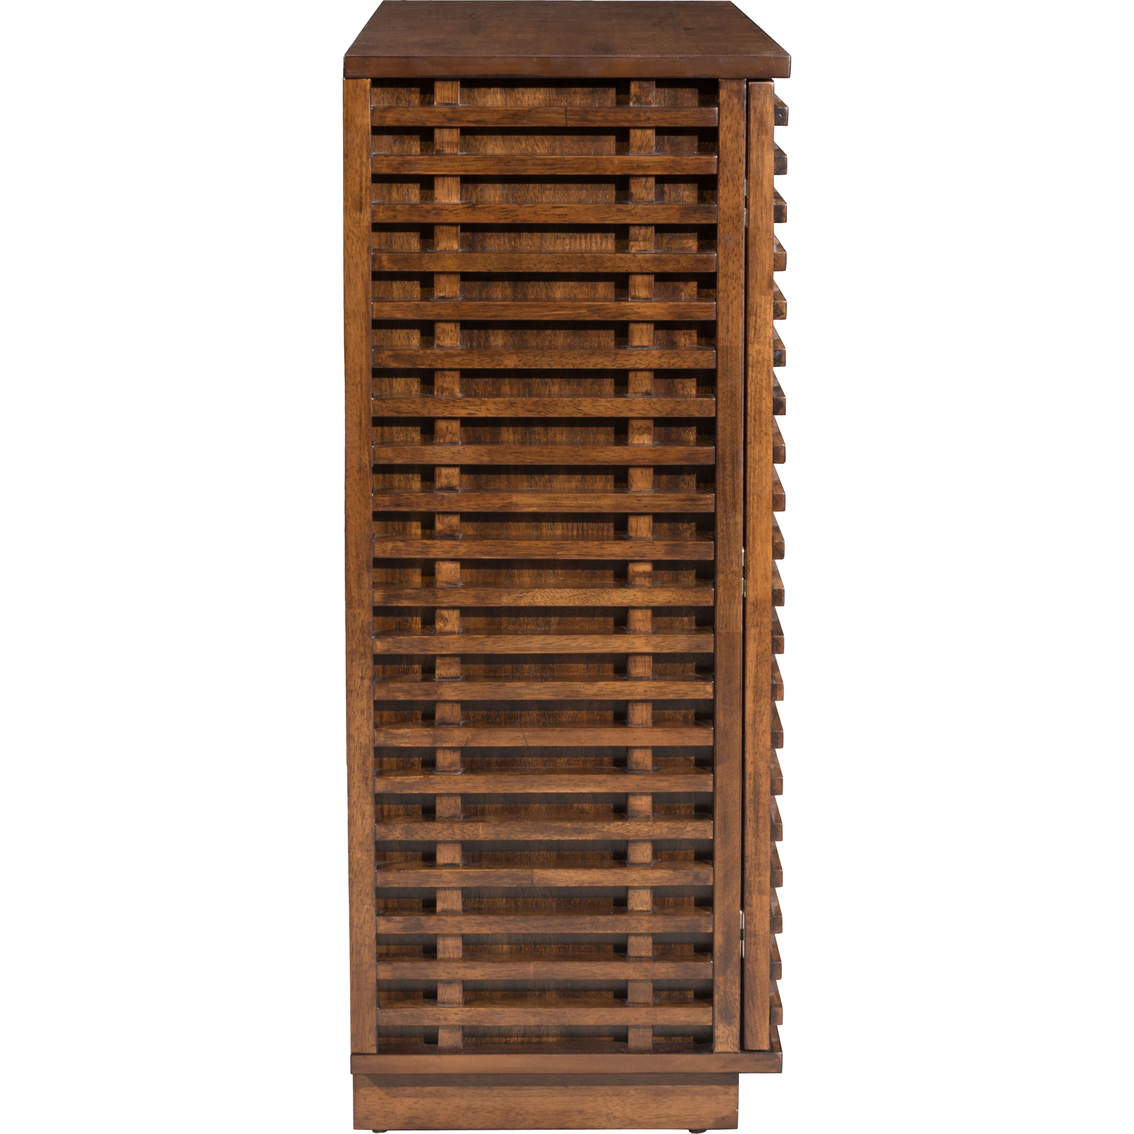 Zuo Modern Linea Cabinet - Image 2 of 8